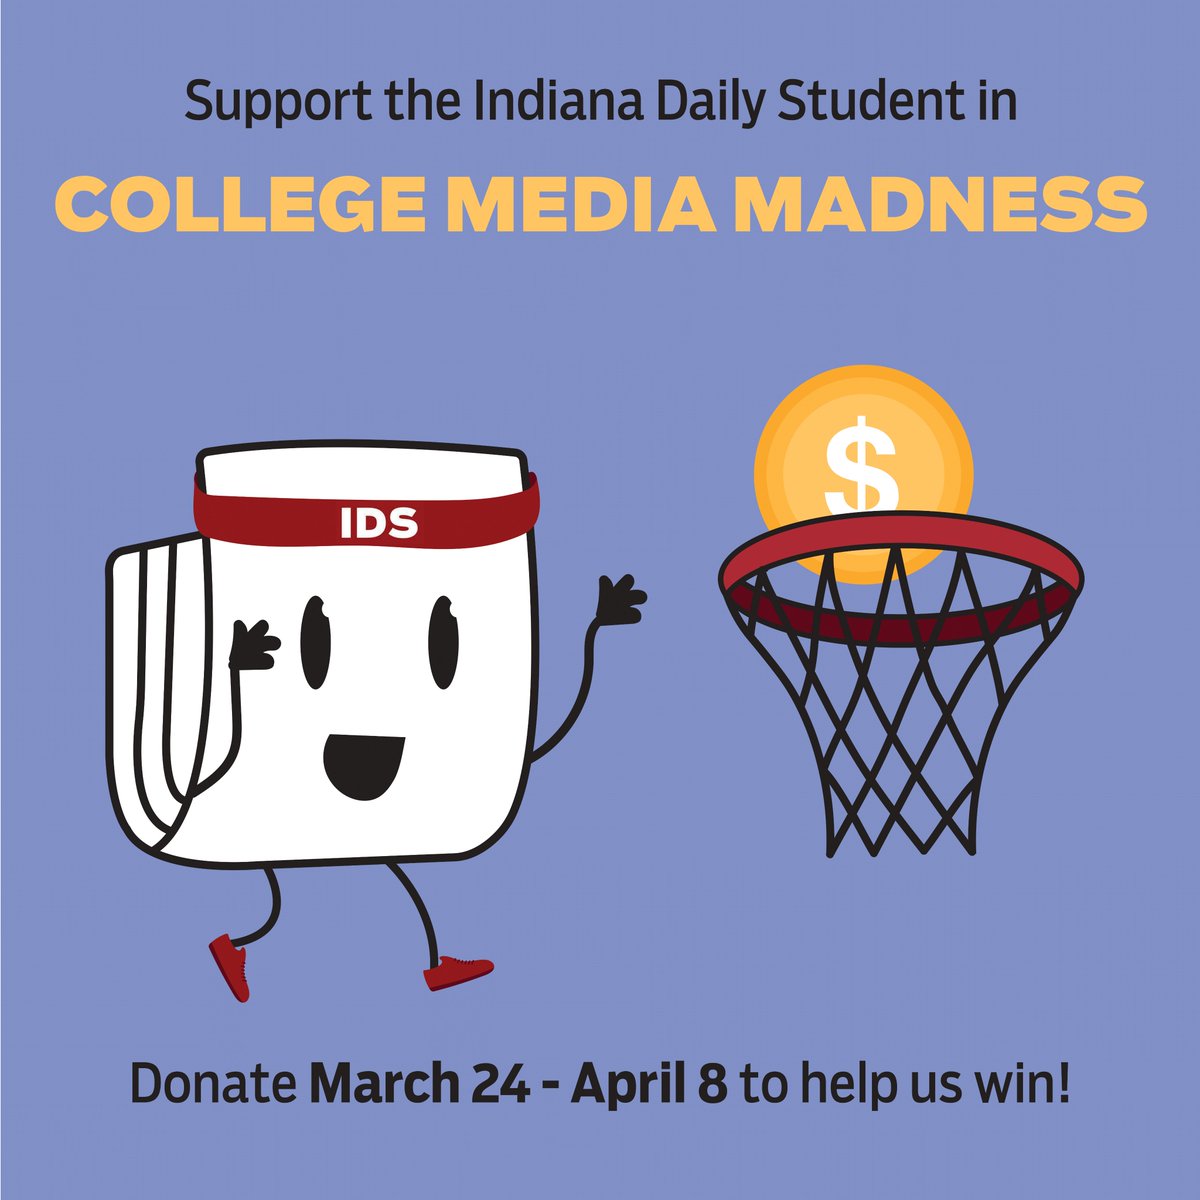 The Indiana Daily Student is participating in College Media Madness, the annual fundraising competition for student newsrooms. You can support the IDS and help us win by donating now through April 8! give.myiu.org/iu-bloomington…